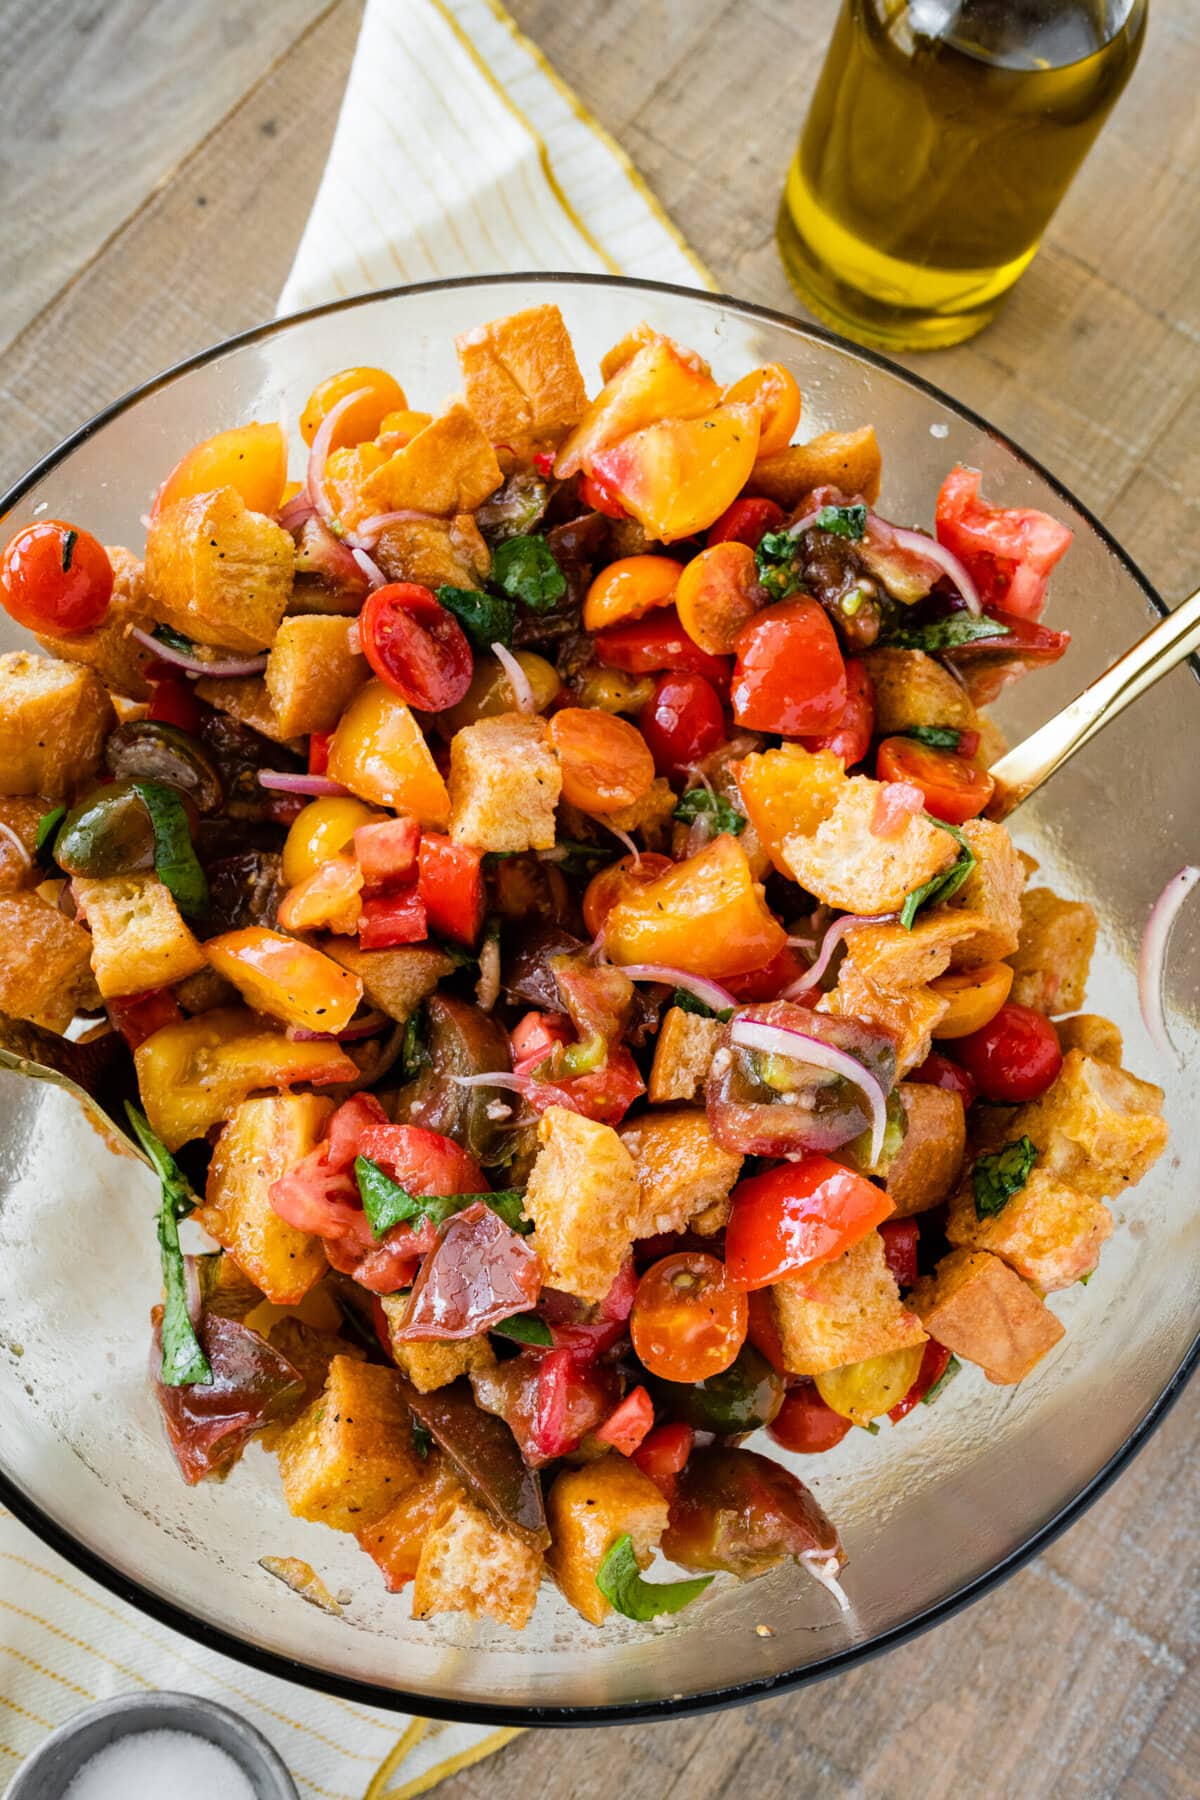 Best Summer Panzanella Salad Recipe (Bread & Tomato)- mixing all the ingredients together in a bowl with salad servers.